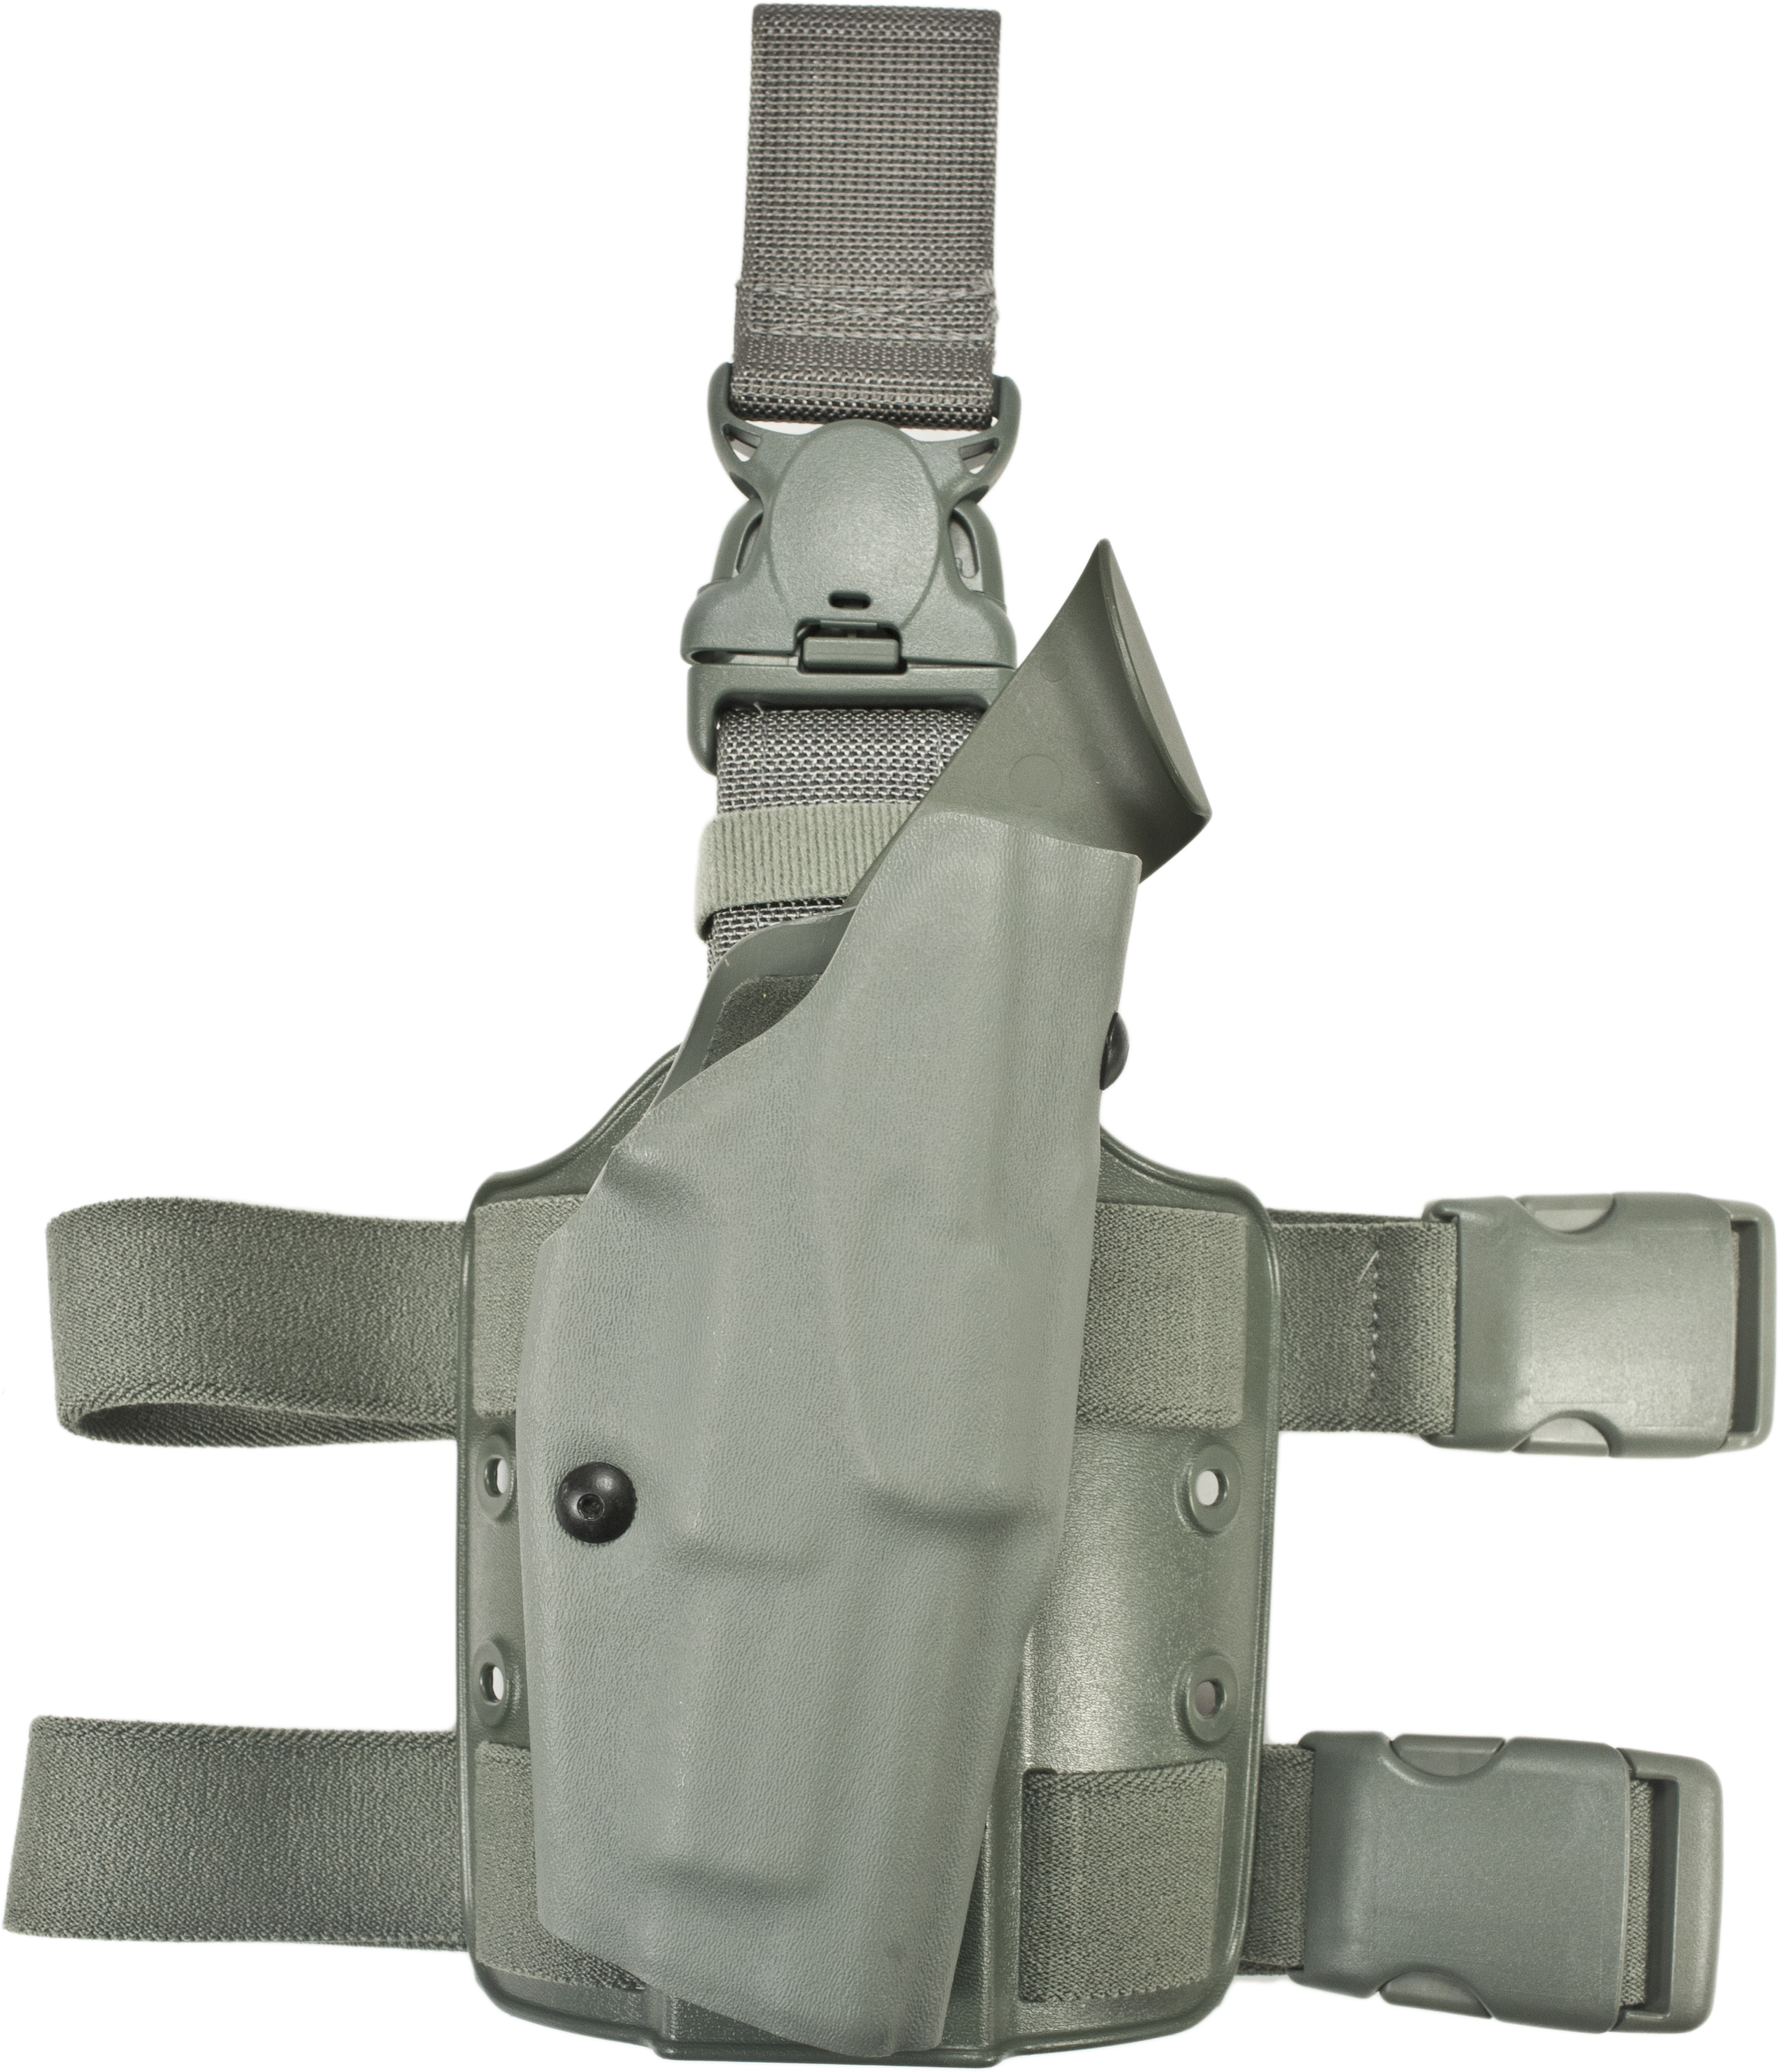  Safariland 6005 P226R STX Black Tactical Holster with